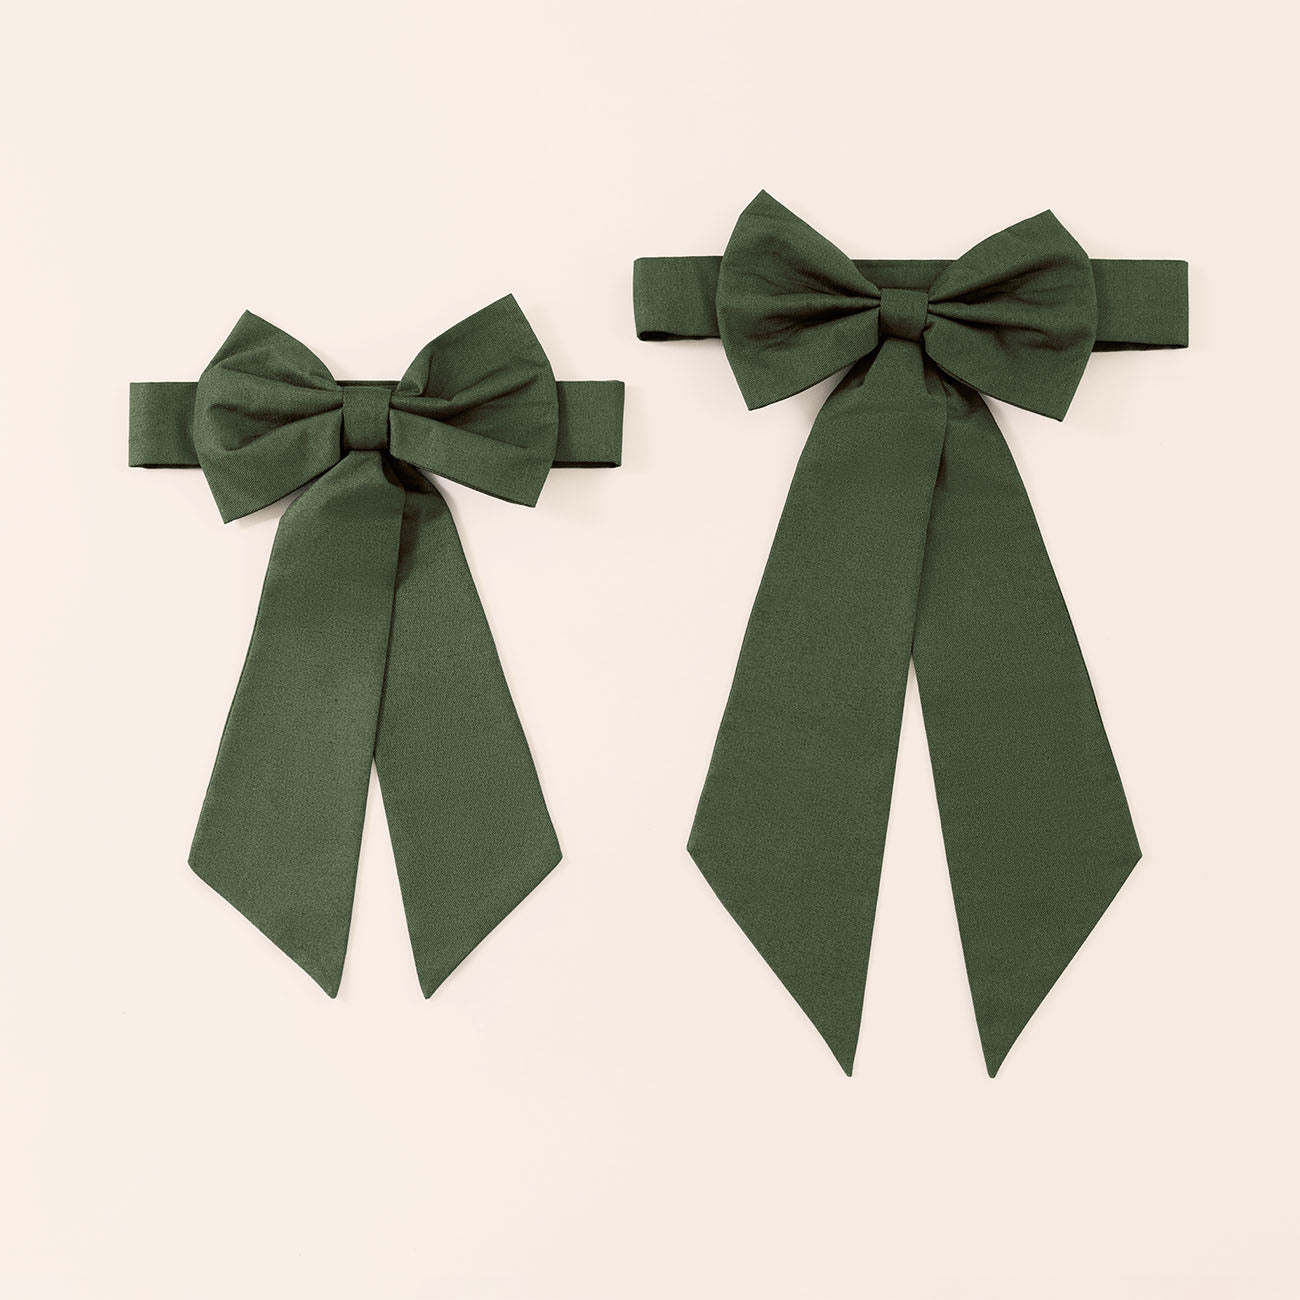 Sage Green Ribbons 1/4 wide Pre-Cut to ANY LENGTH YOU NEED!